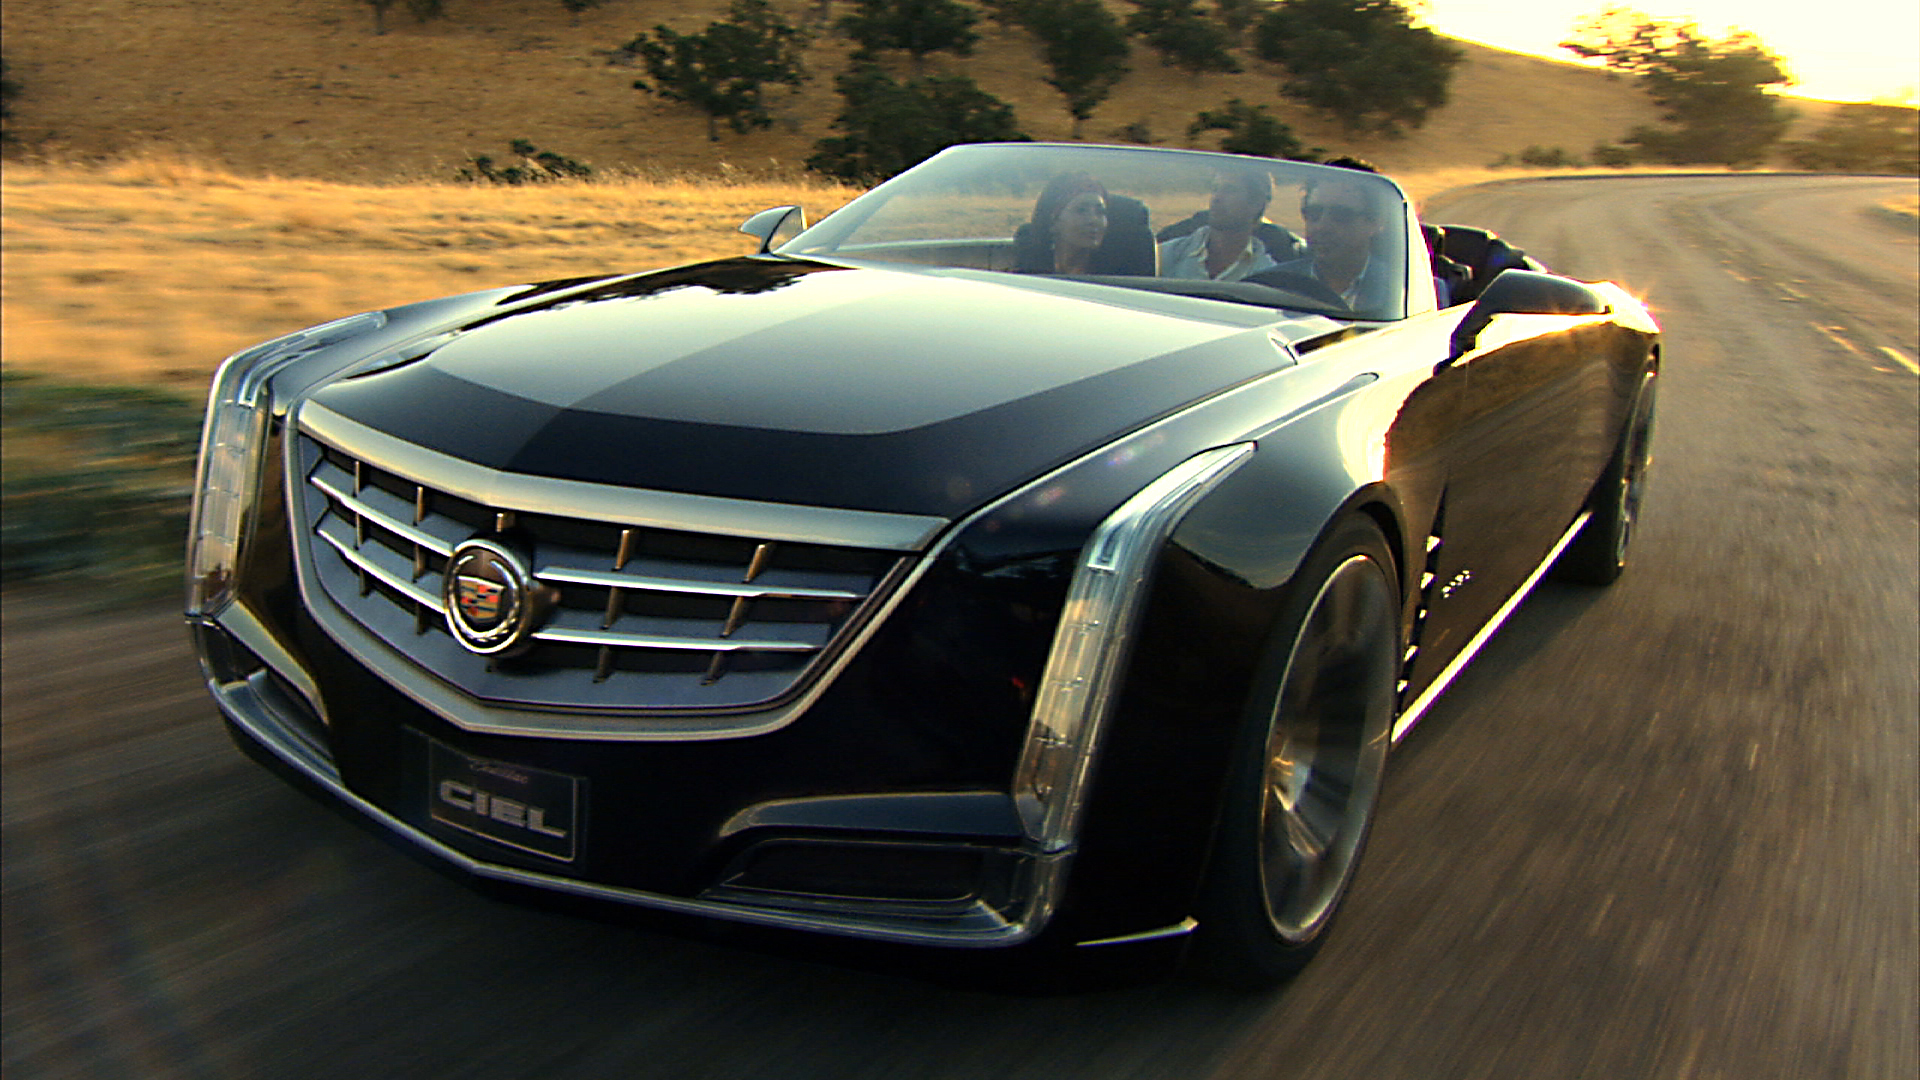 Cadillac Ciel Concept Is A FourSeat Convertible Winding Road Magazine